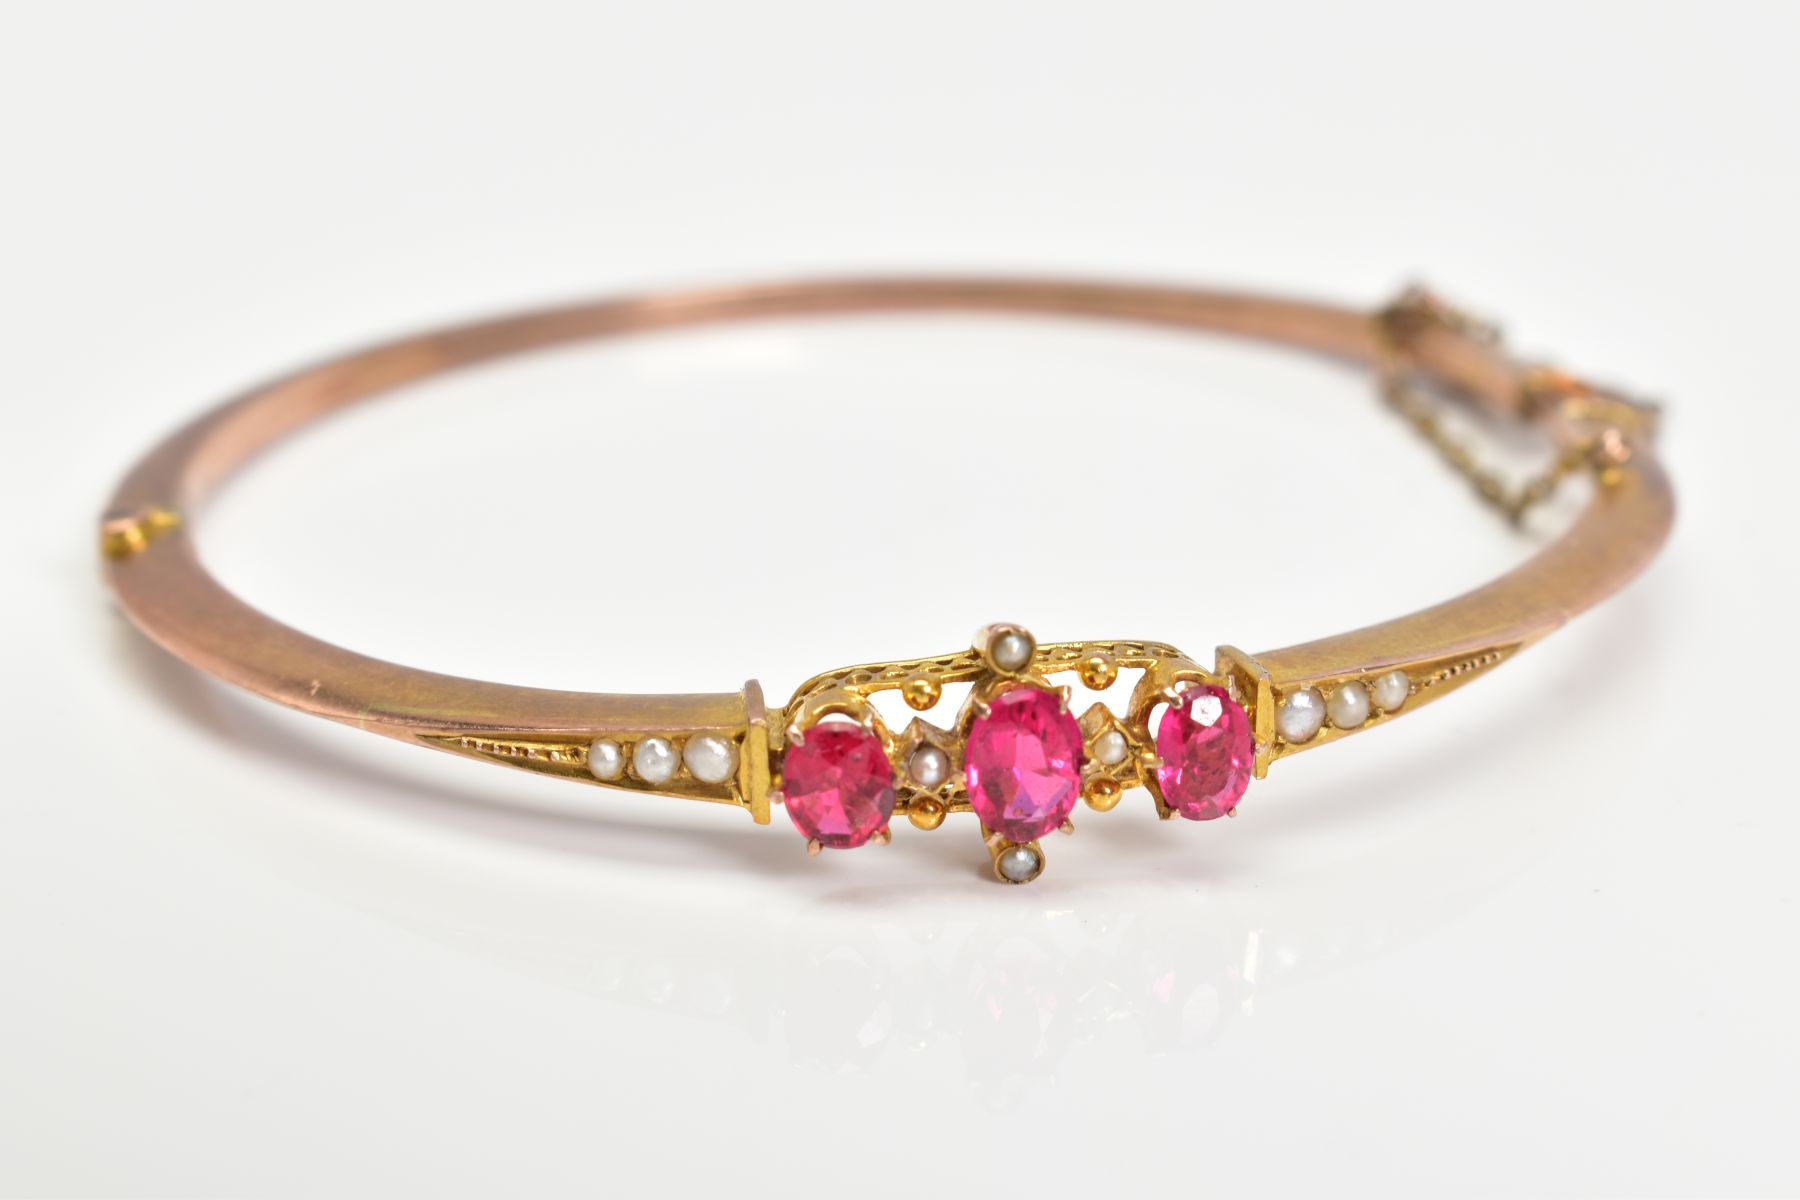 AN EARLY 20TH CENTURY GOLD SPLIT PEARL AND GARNET TOPPED DOUBLET FANCY BANGLE, measuring